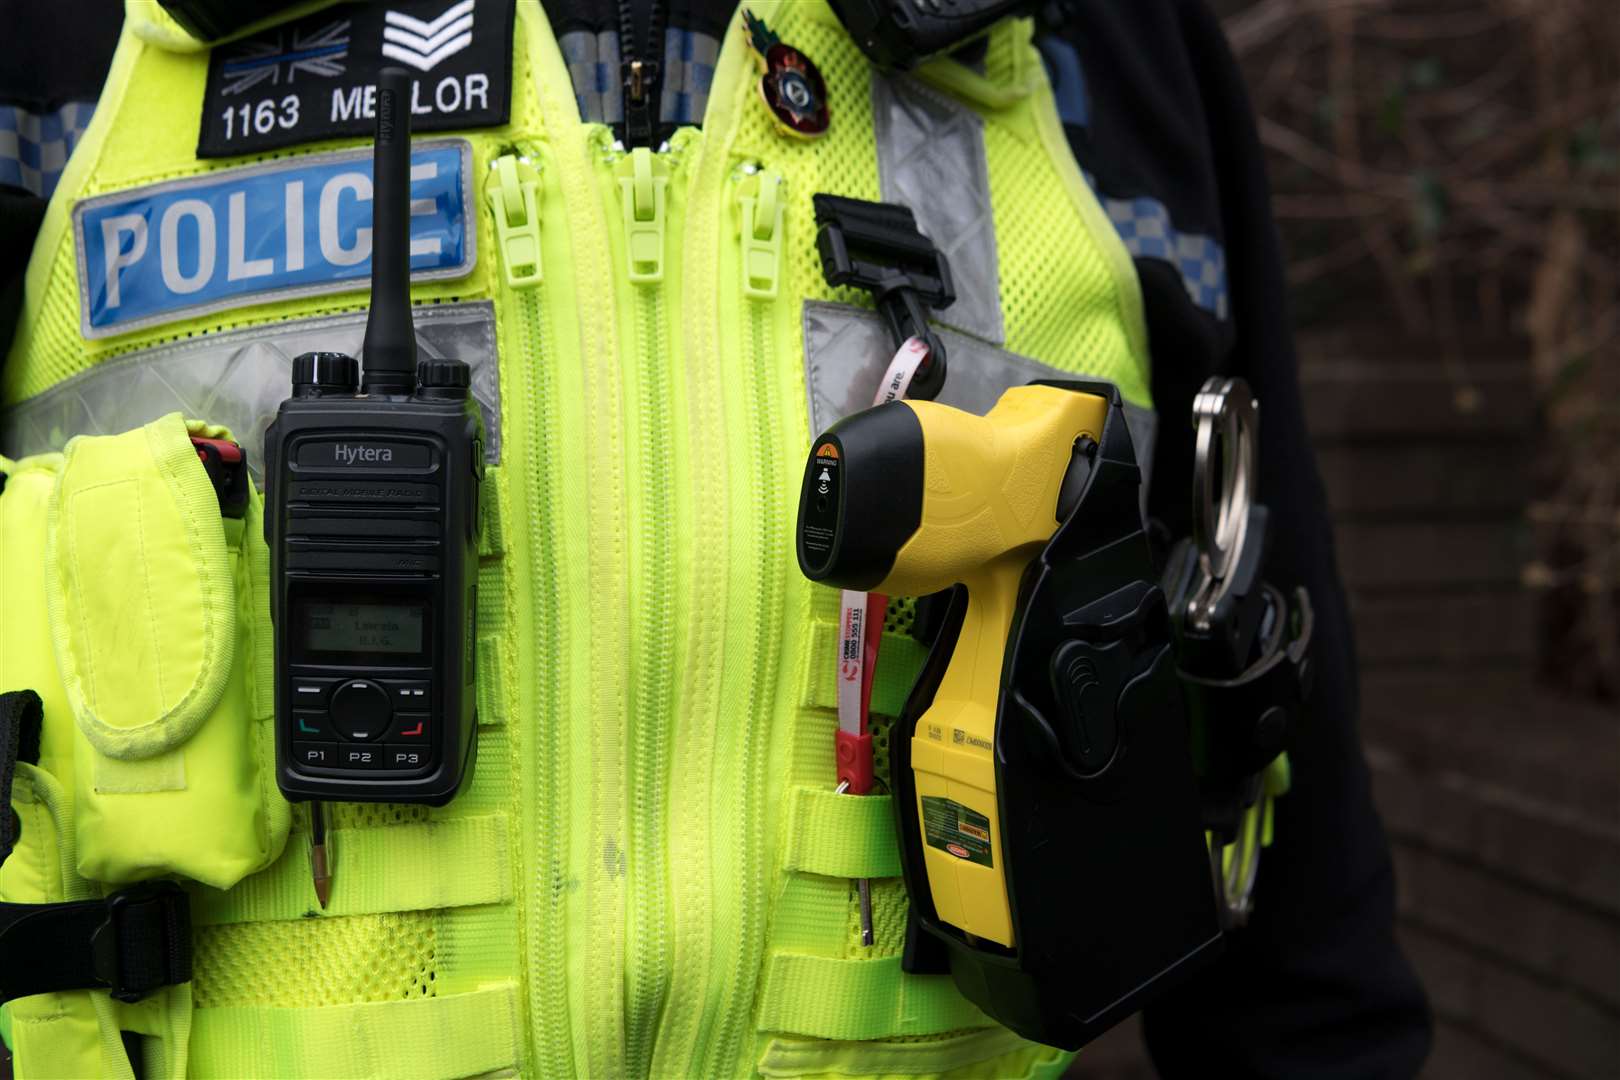 A total of £2.7 million will be saved by retiring long-standing officers